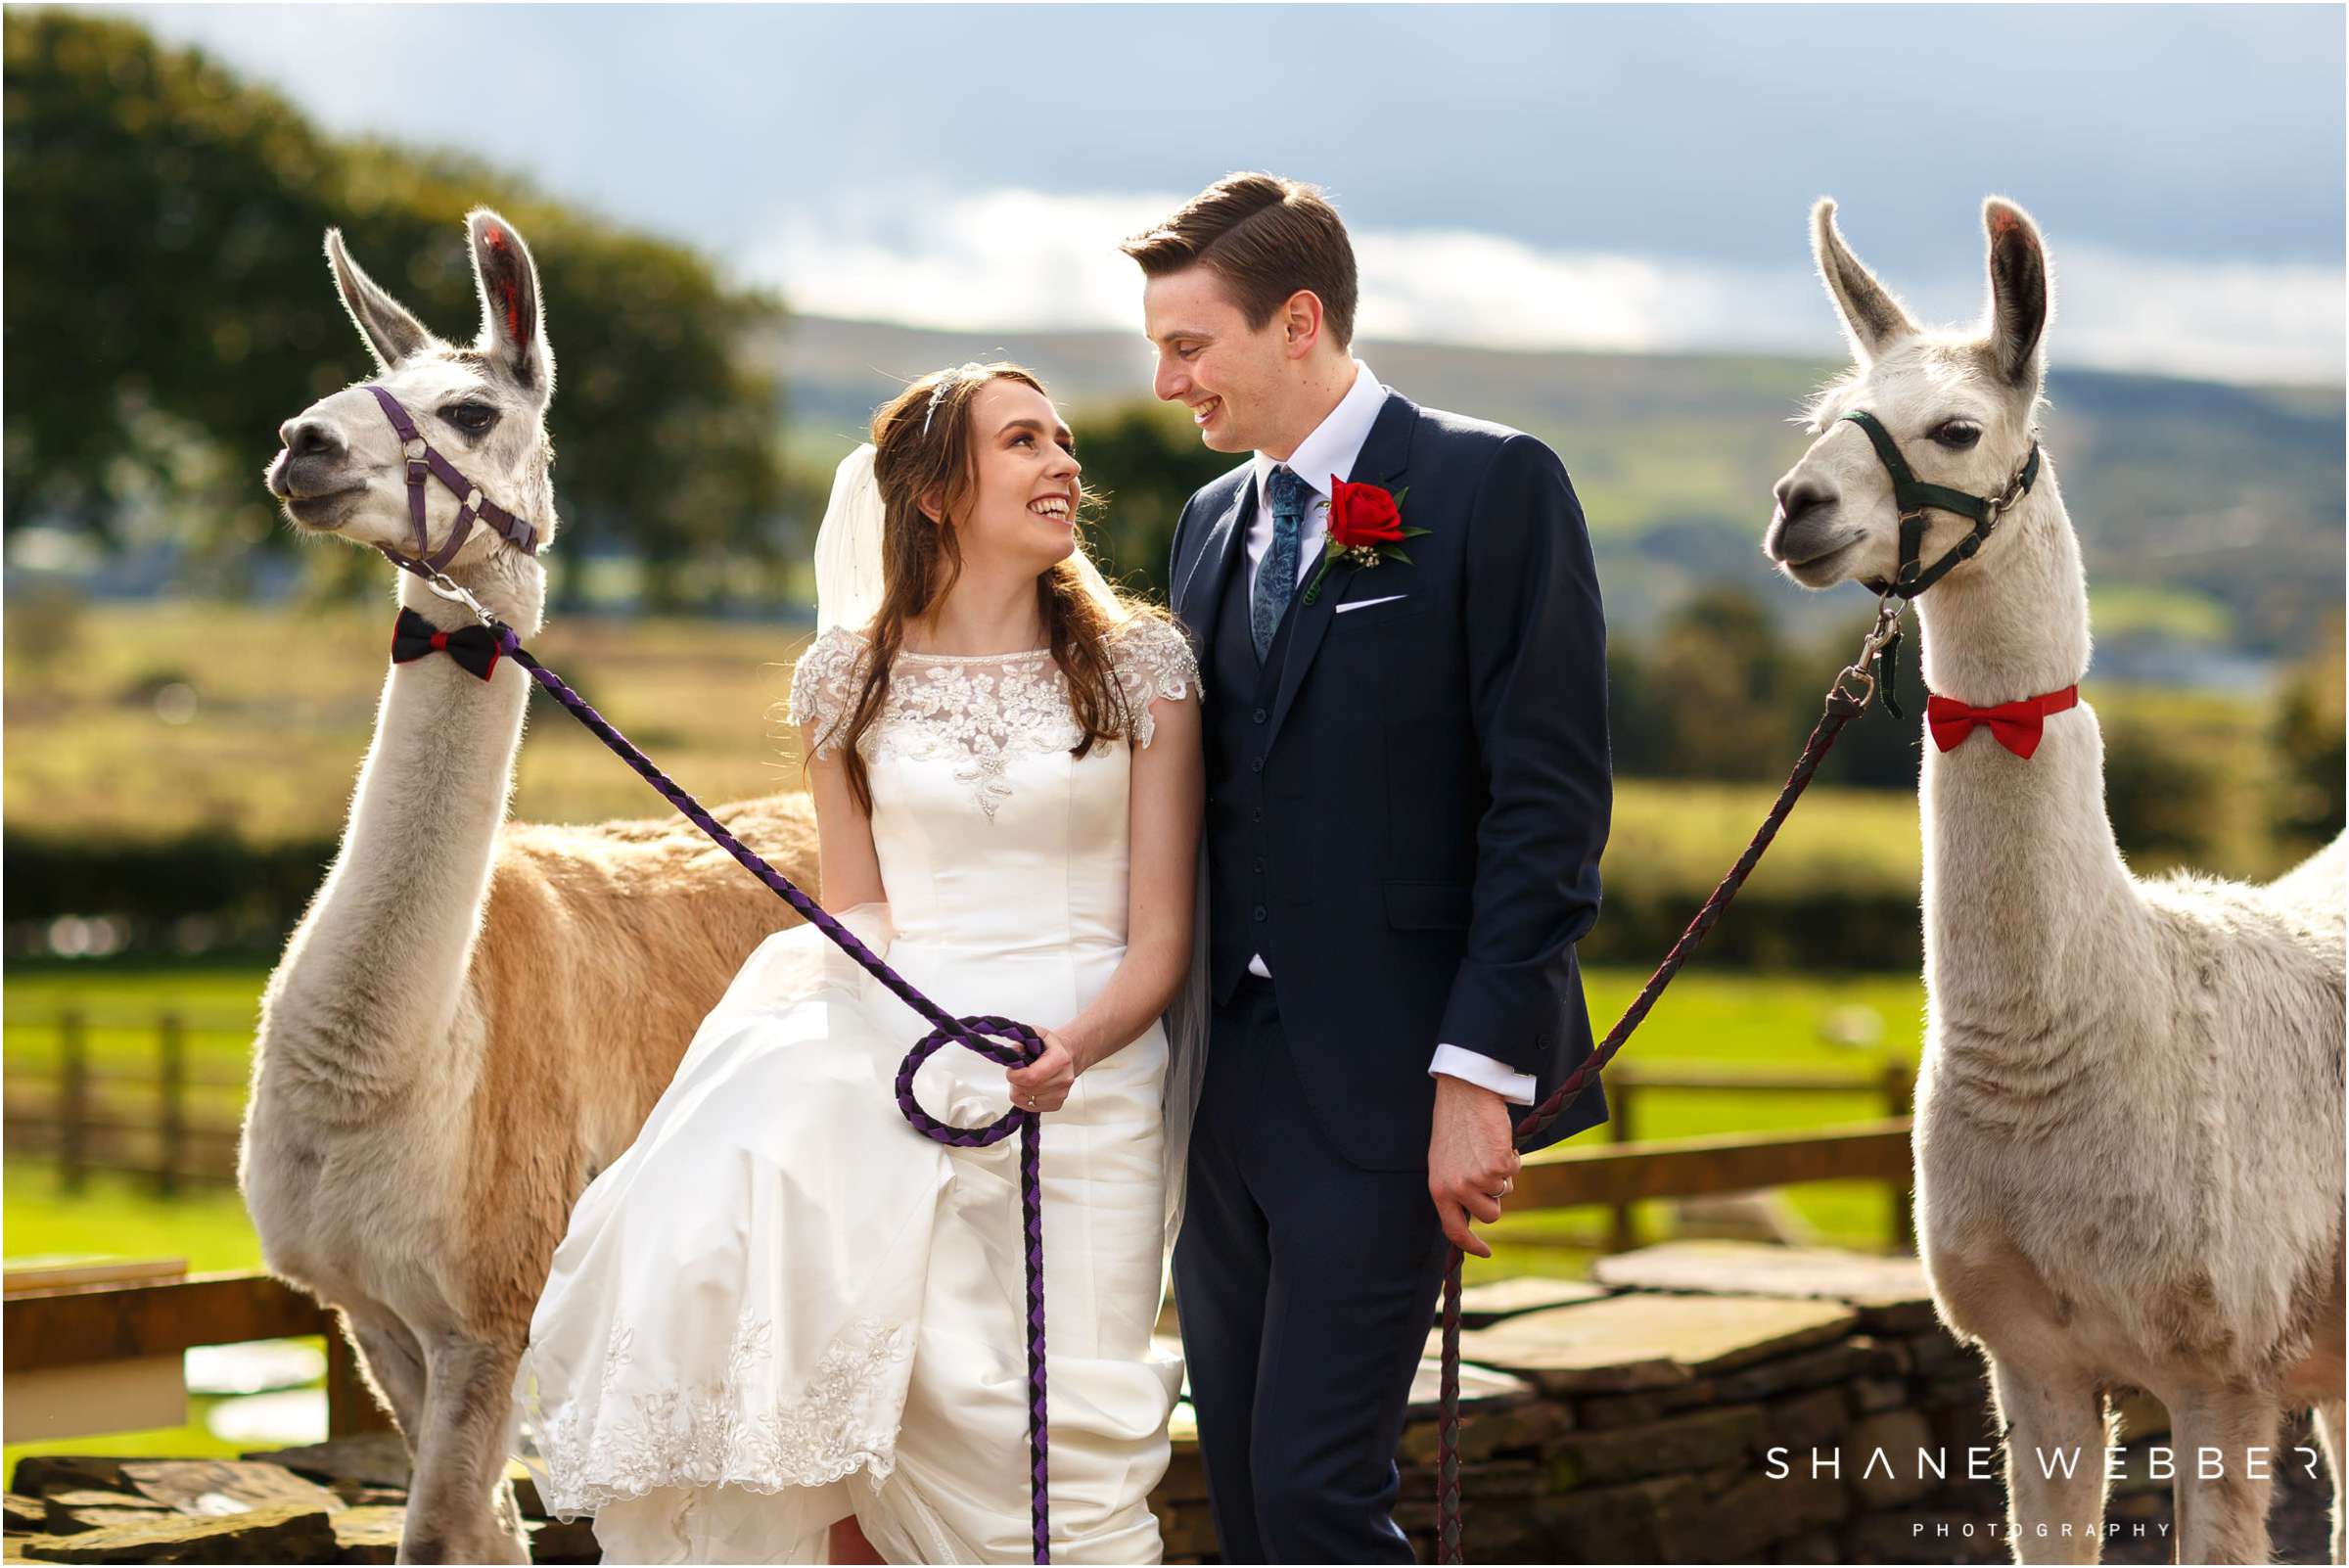 quirky wedding photography 